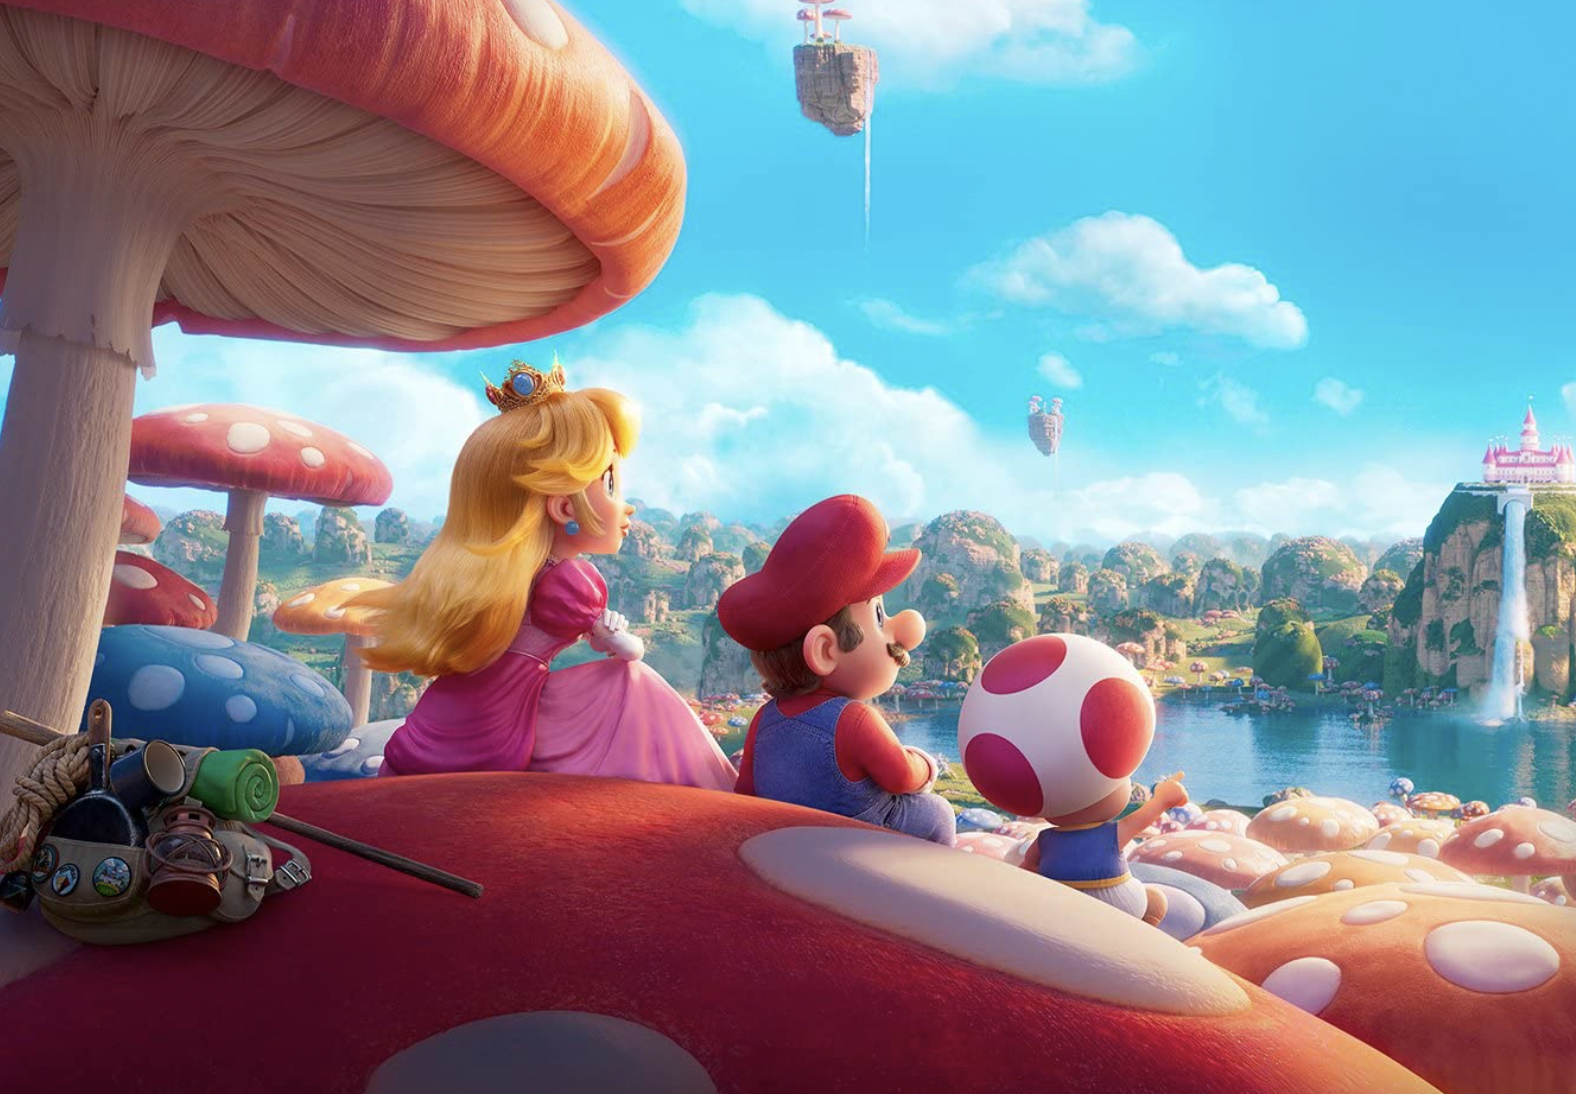 Will “The Super Mario Bros. Movie” Be On Disney+? – What's On